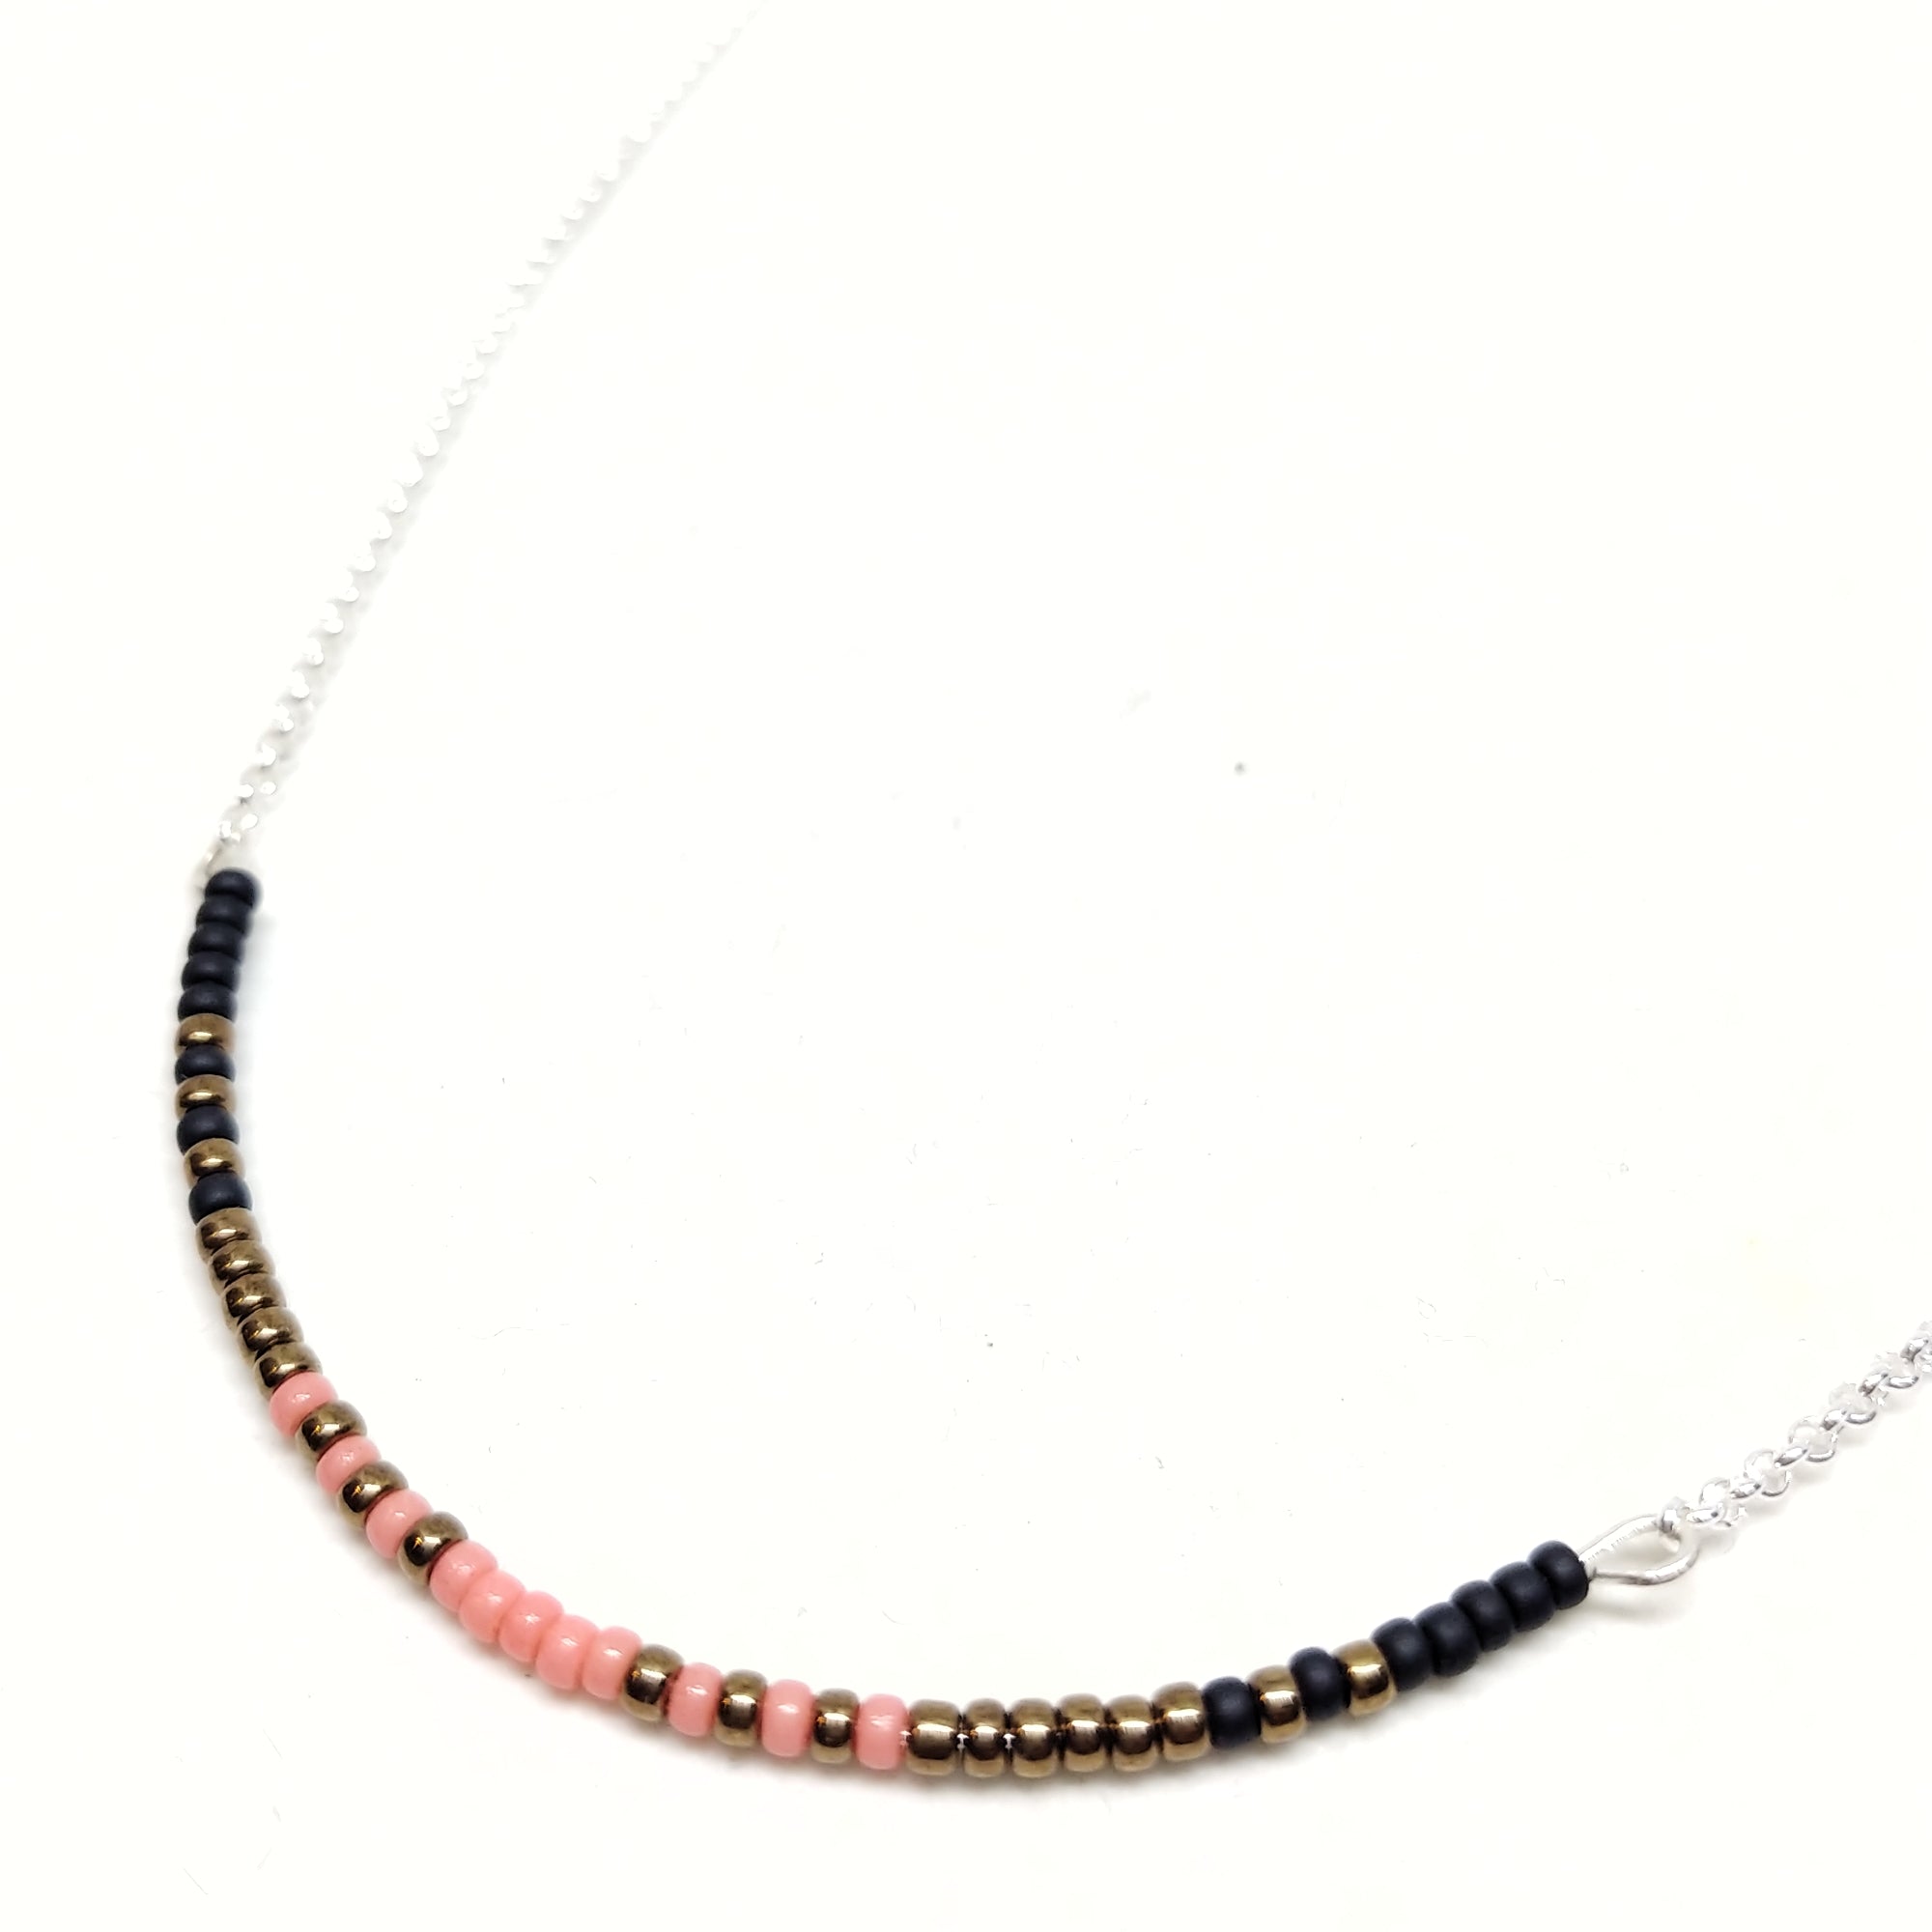 Ready To Rise Necklace: Sterling Silver chain featuring focal piece with seed beads in salmon, black and bronze.